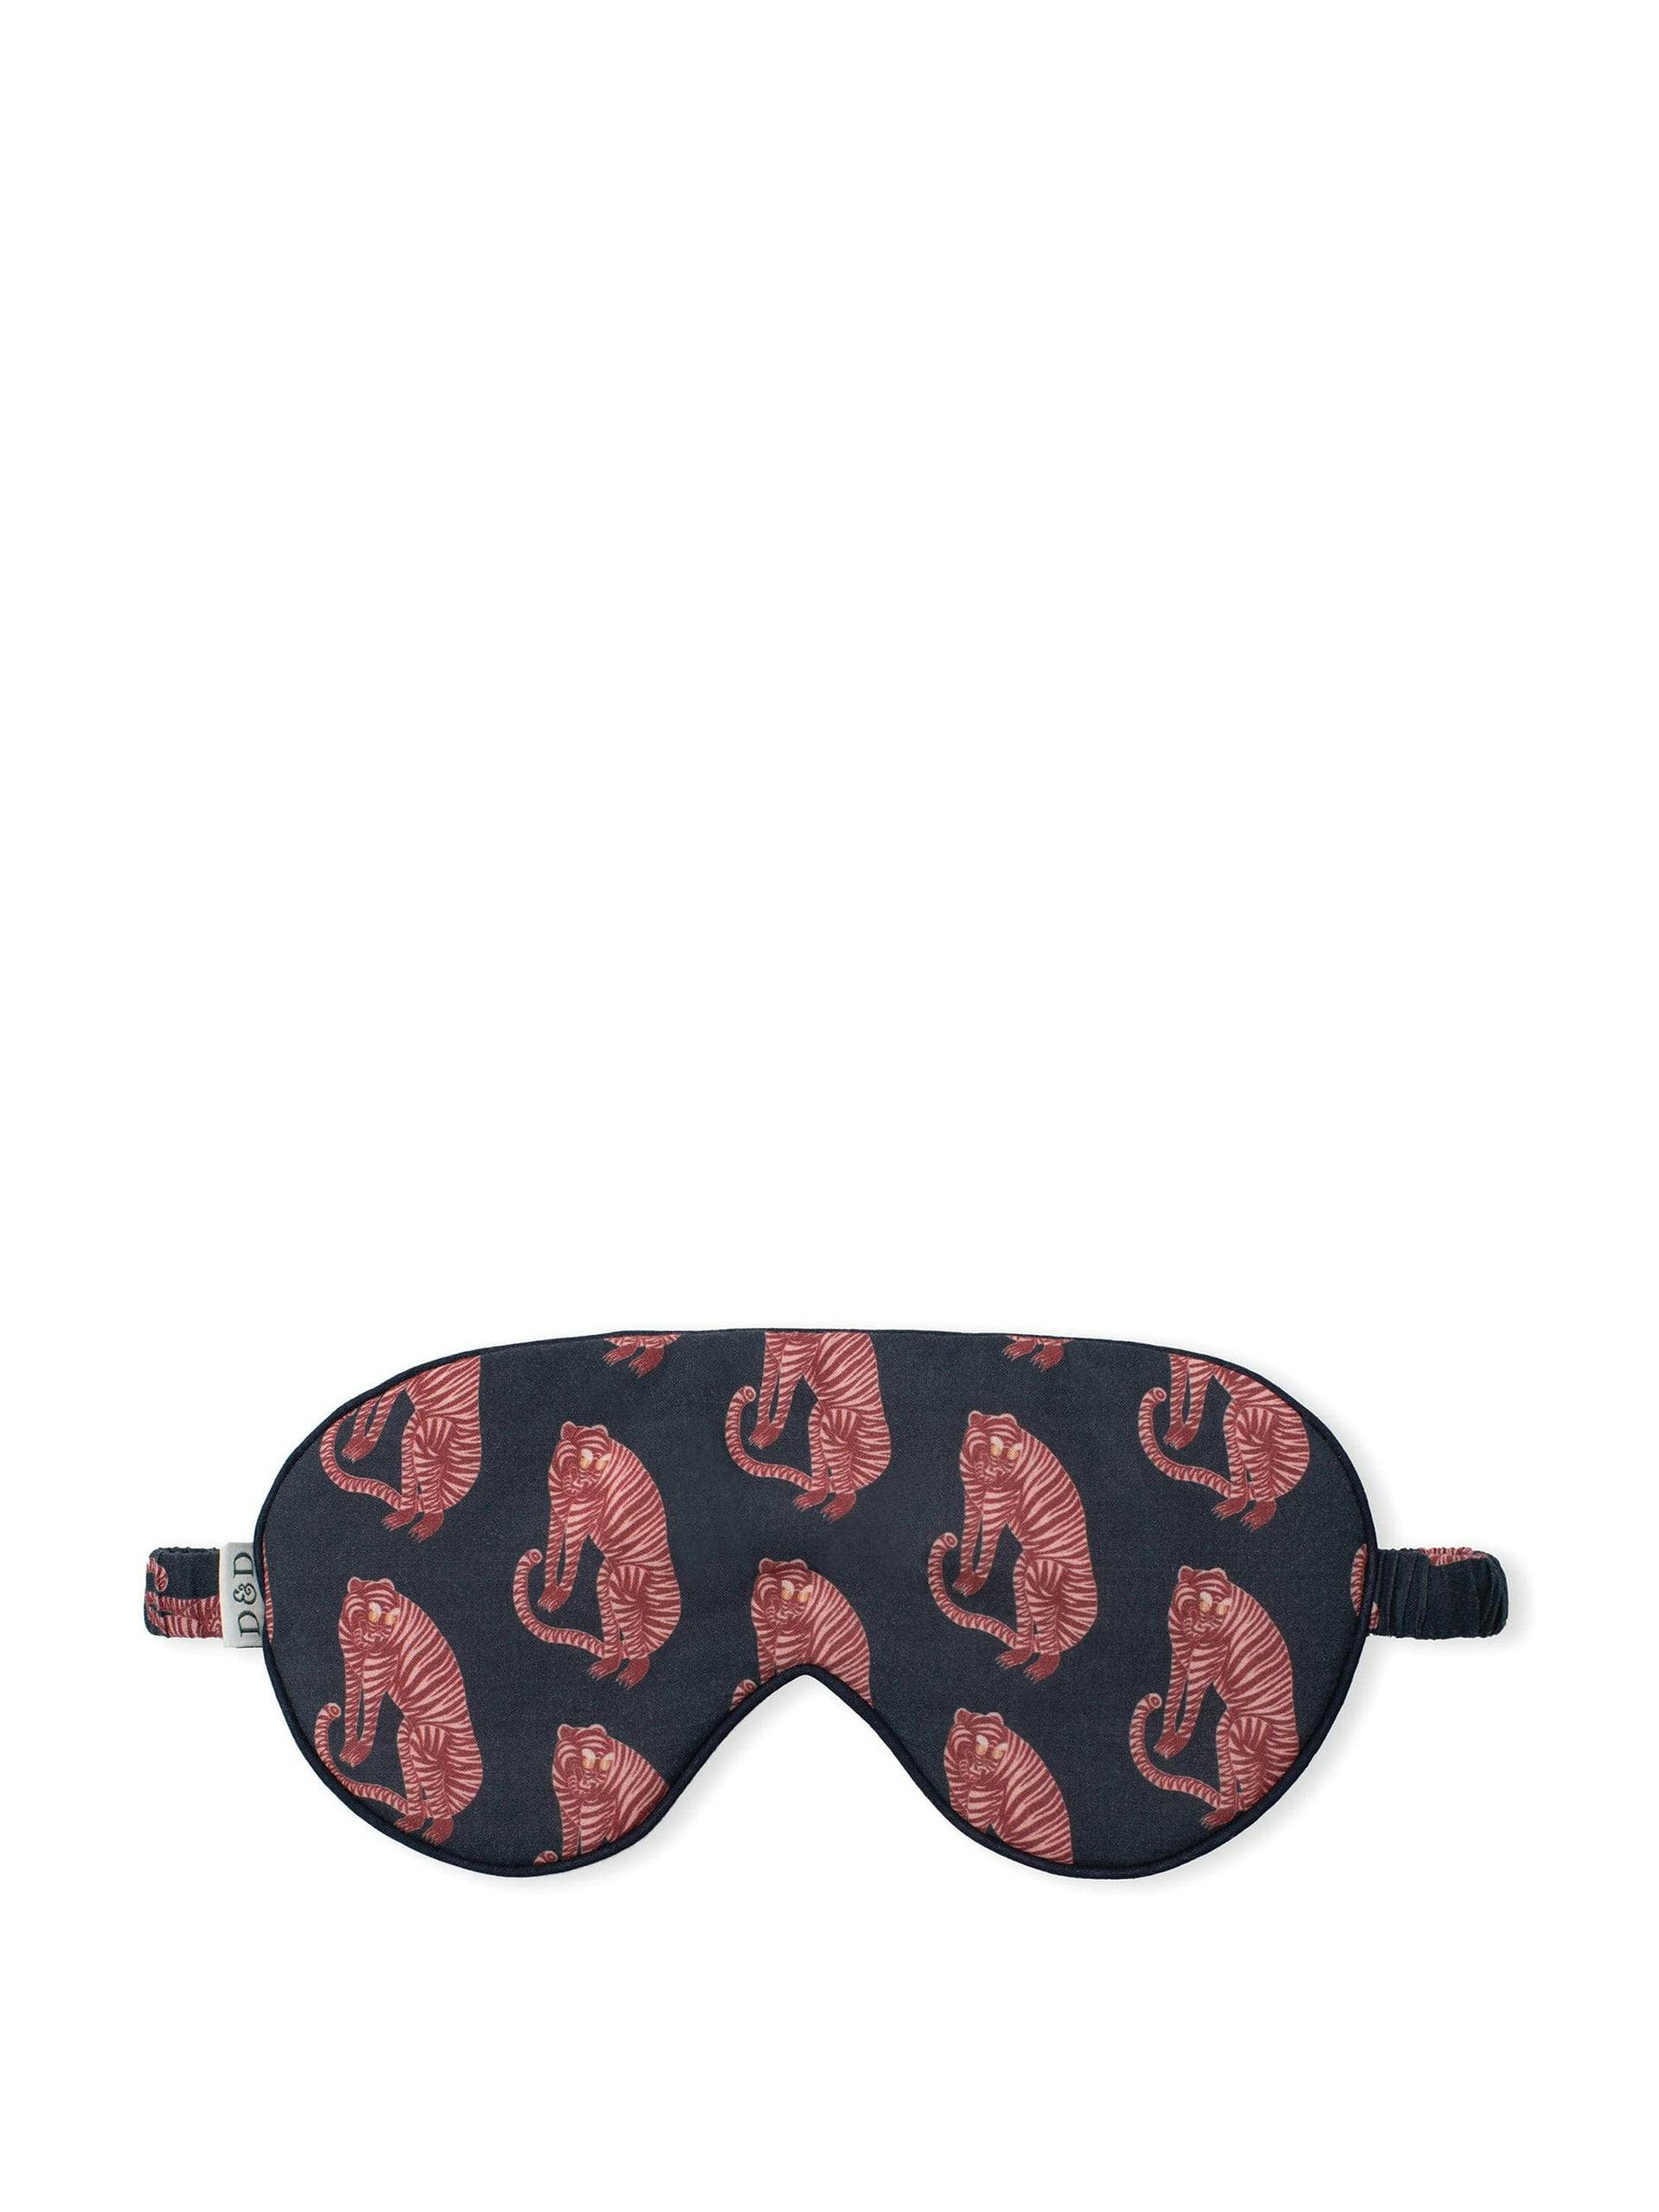 Cotton luxe eye mask in navy and pink Sansindo Tiger print